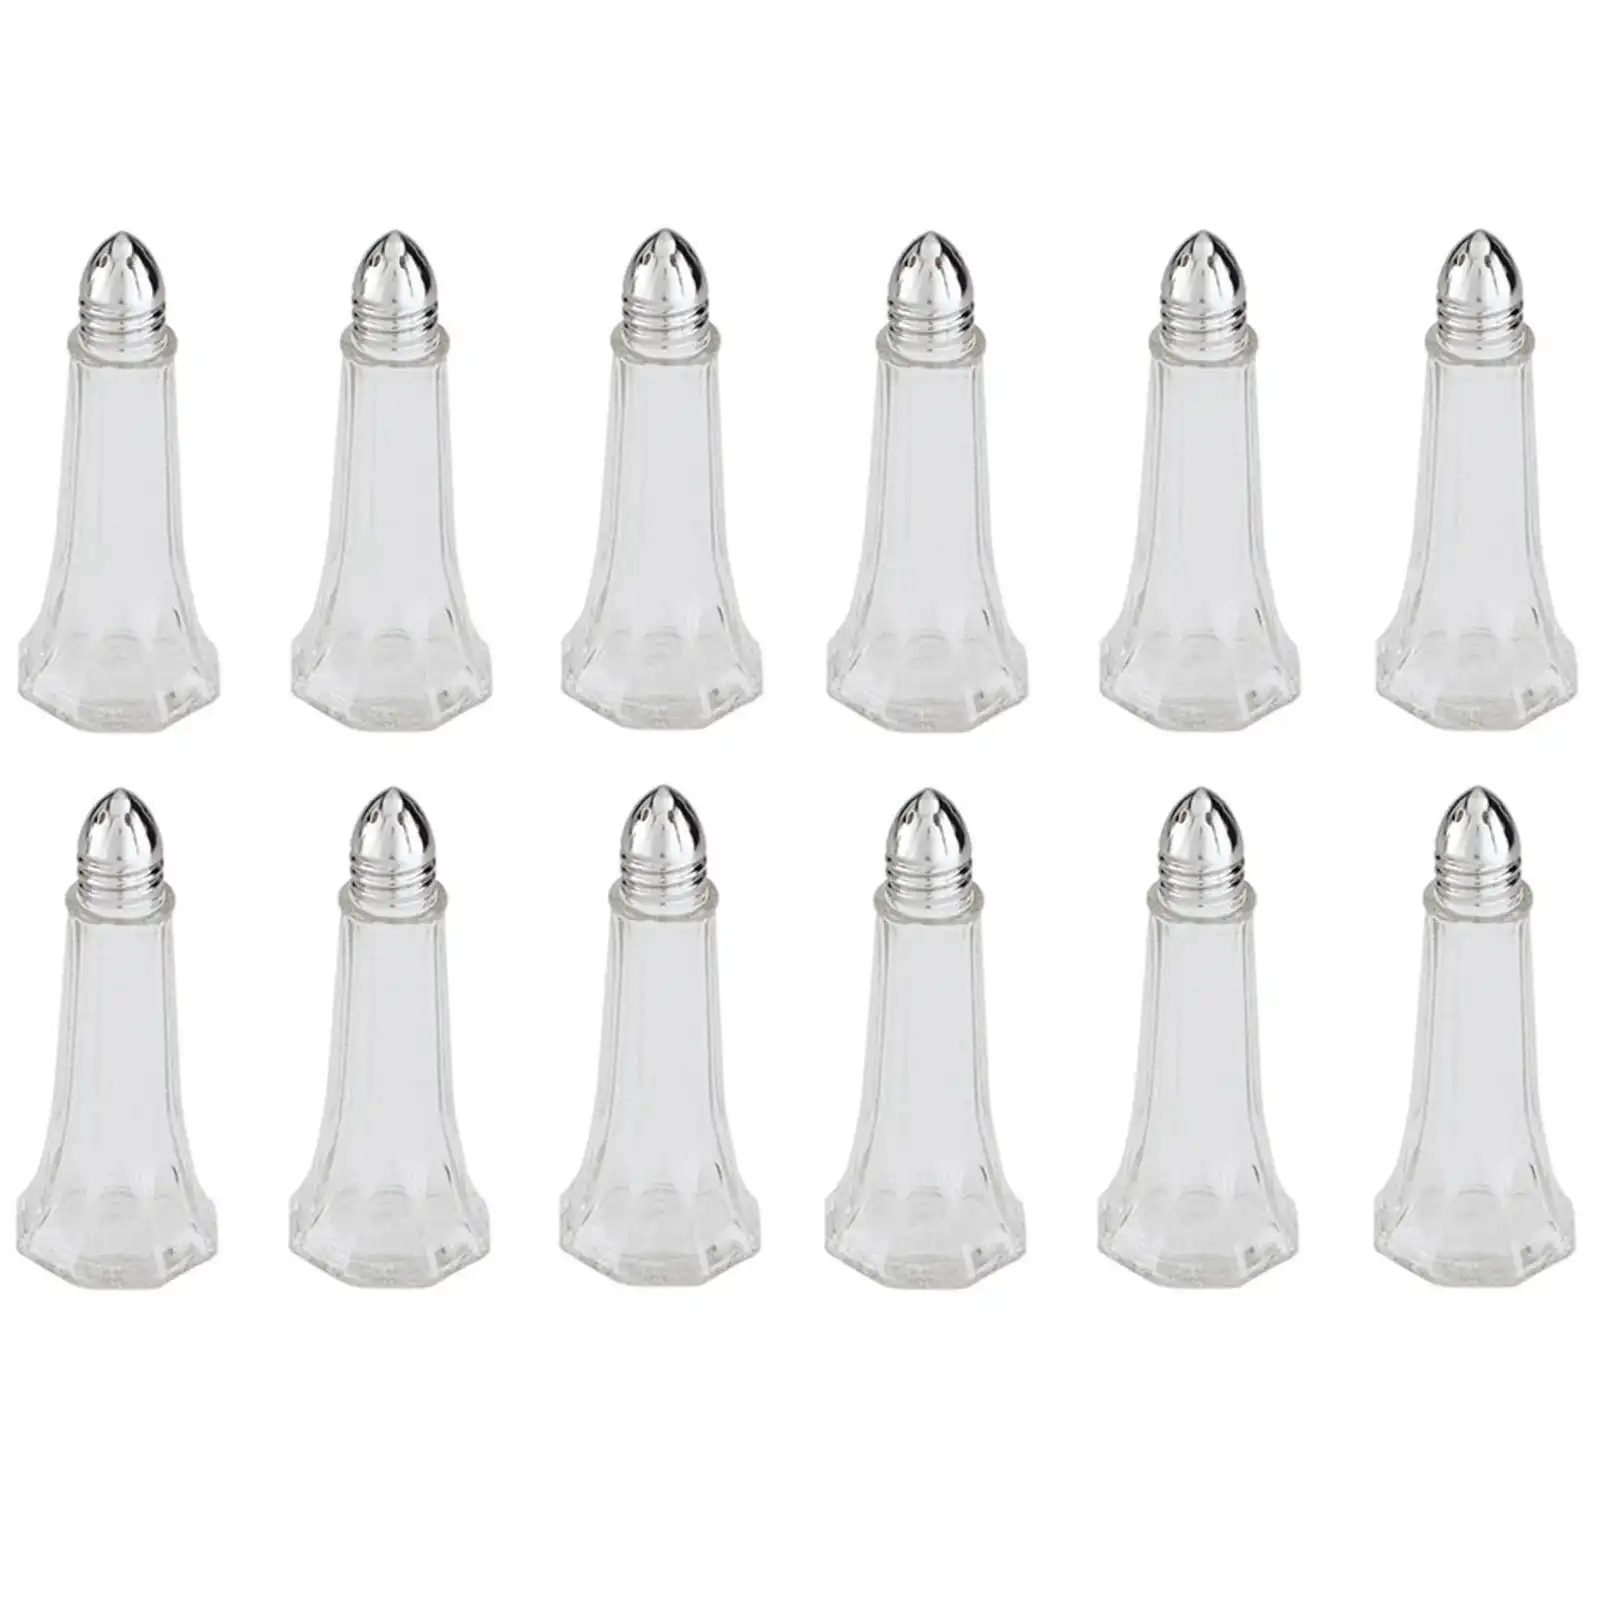 12 Glass Salt And Pepper Shakers Tower